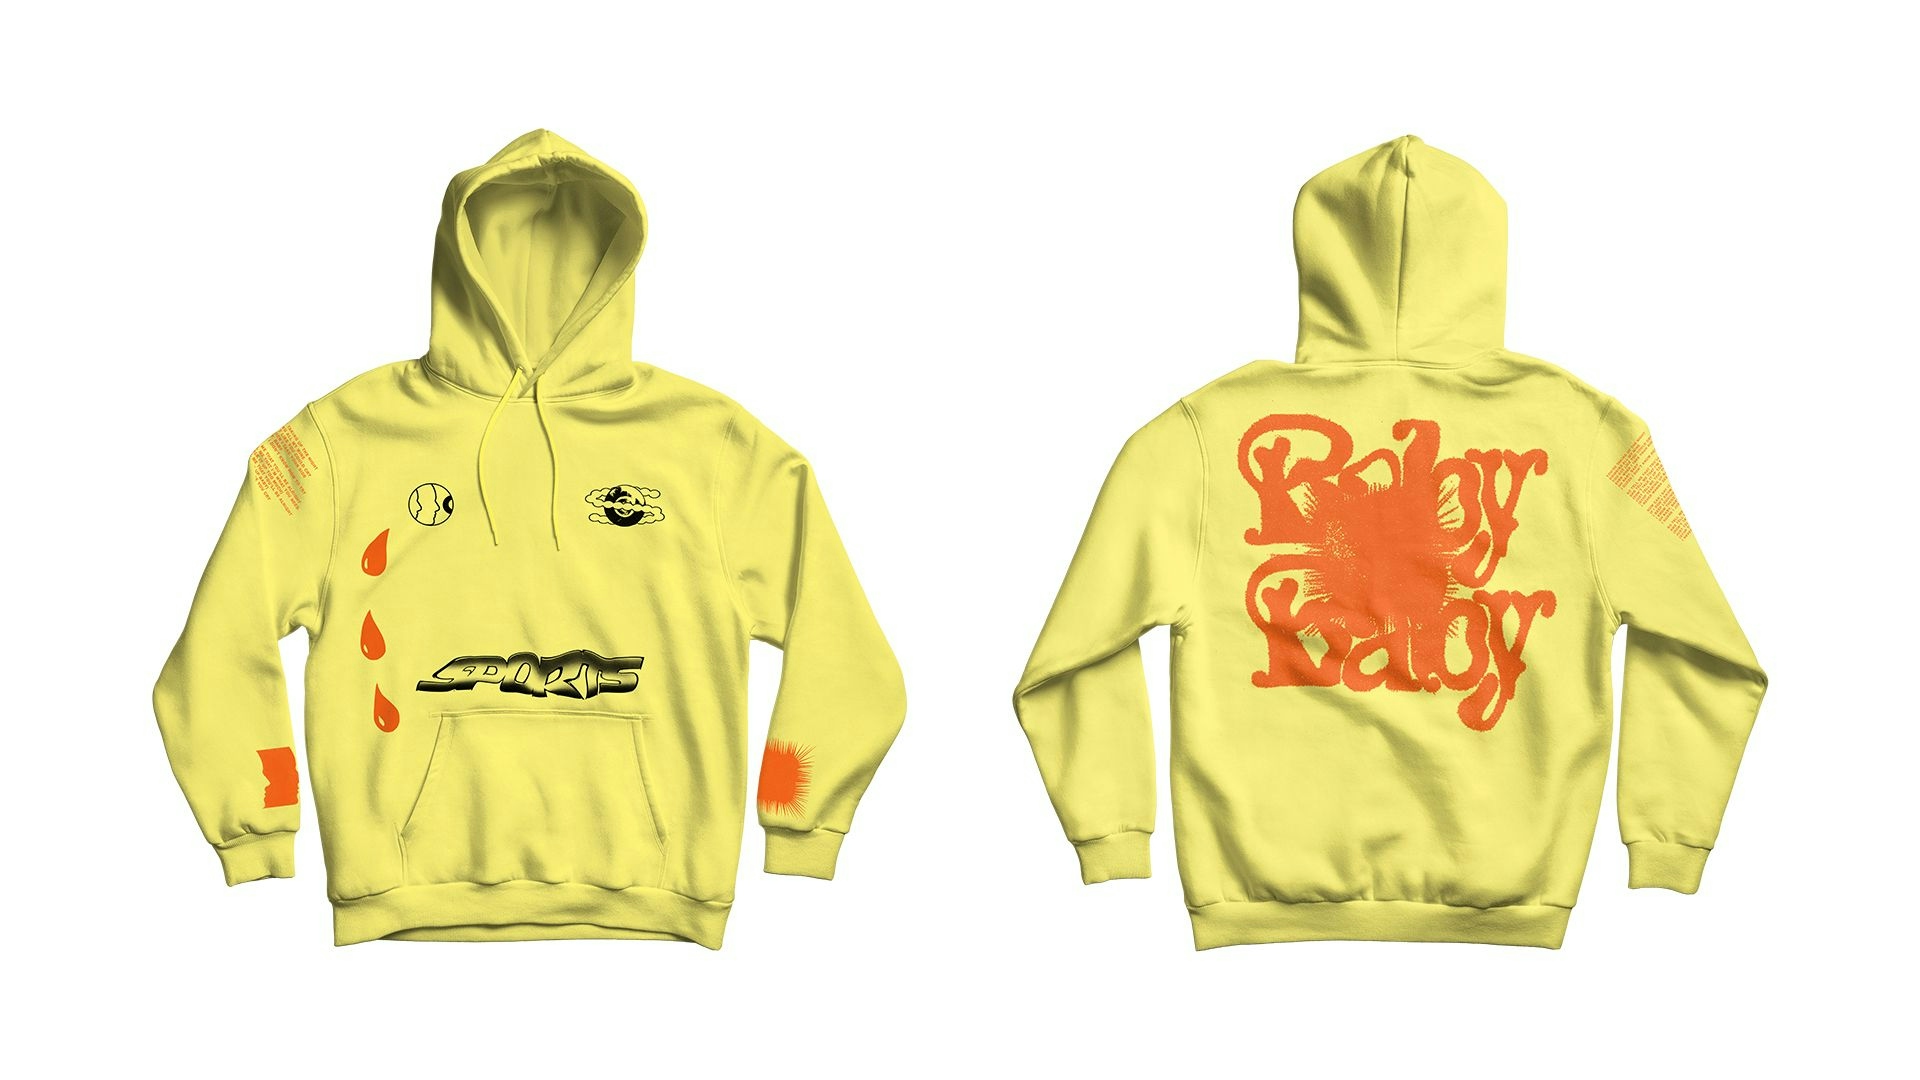 From the Sports Get A Good Look Album Campaign is a flat-lay of the yellow graphic hoodie